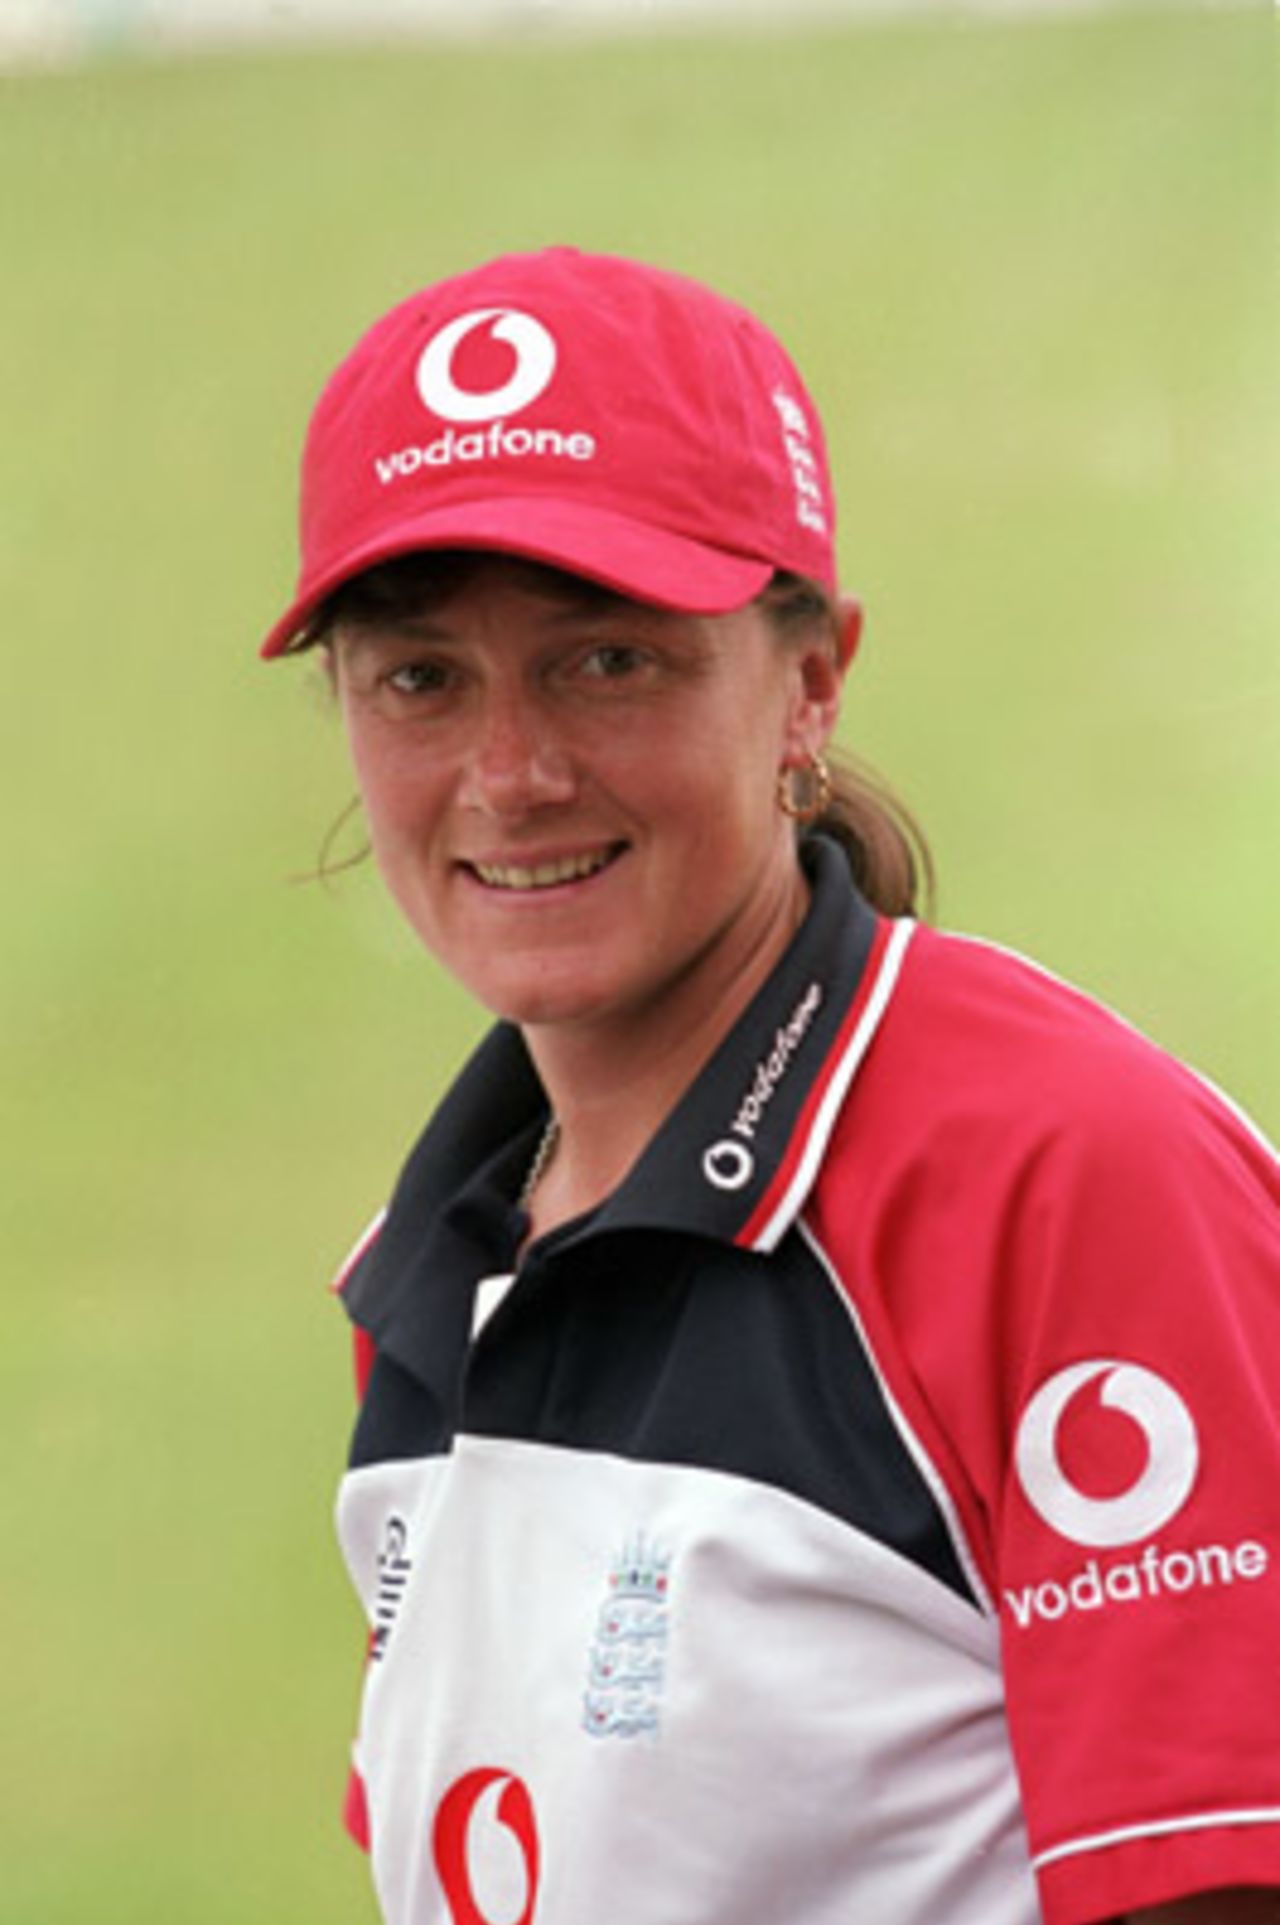 Portrait of Clare Taylor - England player in the CricInfo Women's World Cup 2000